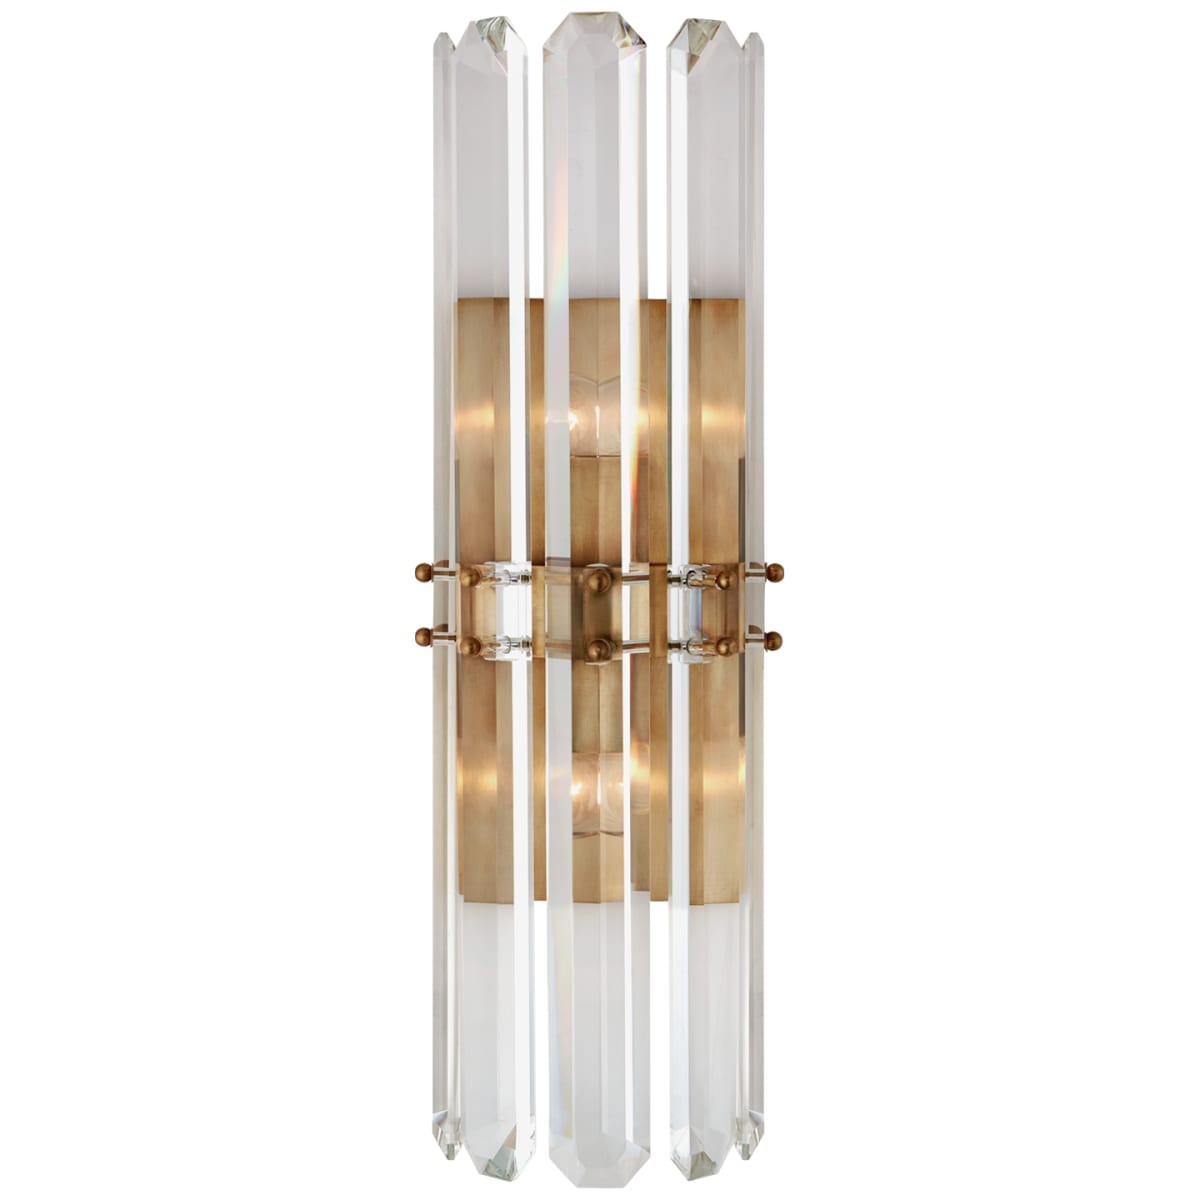 Bonning Wall Sconce 22"